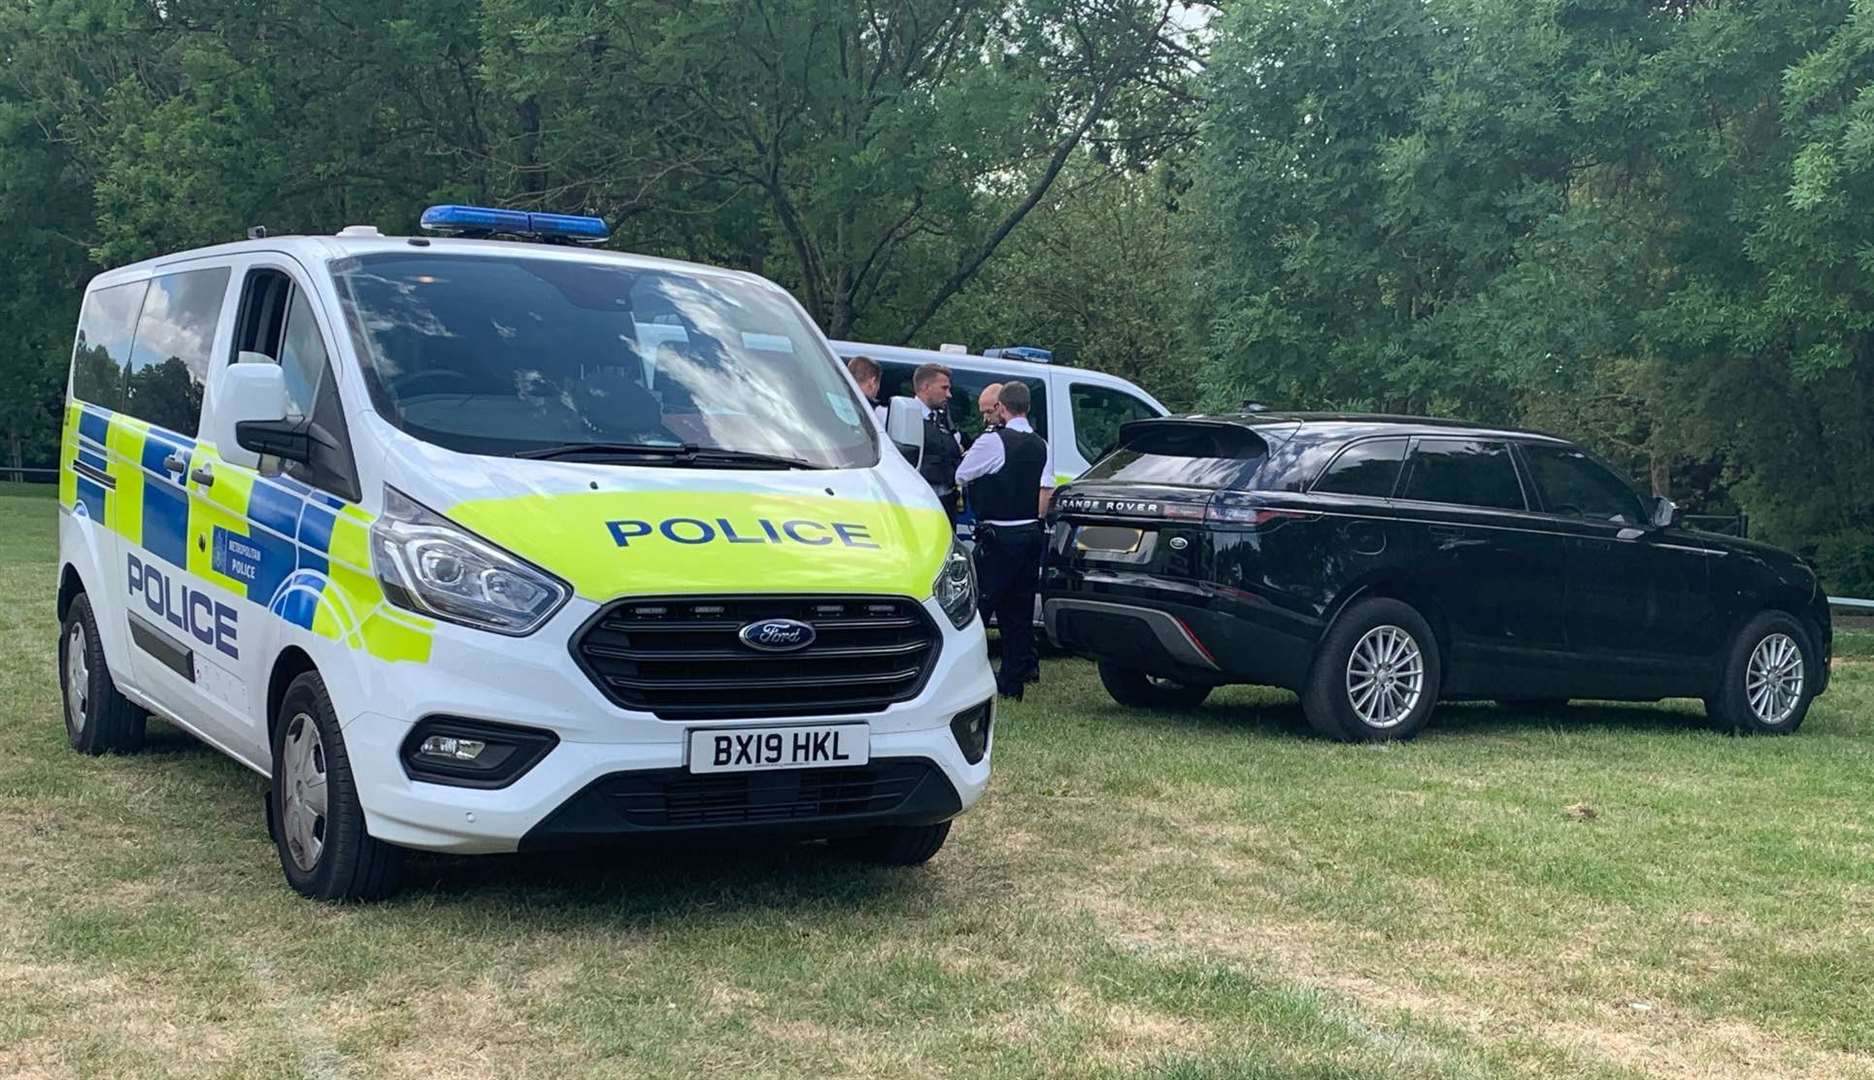 The vehicles was searched inside Danson Park in Welling